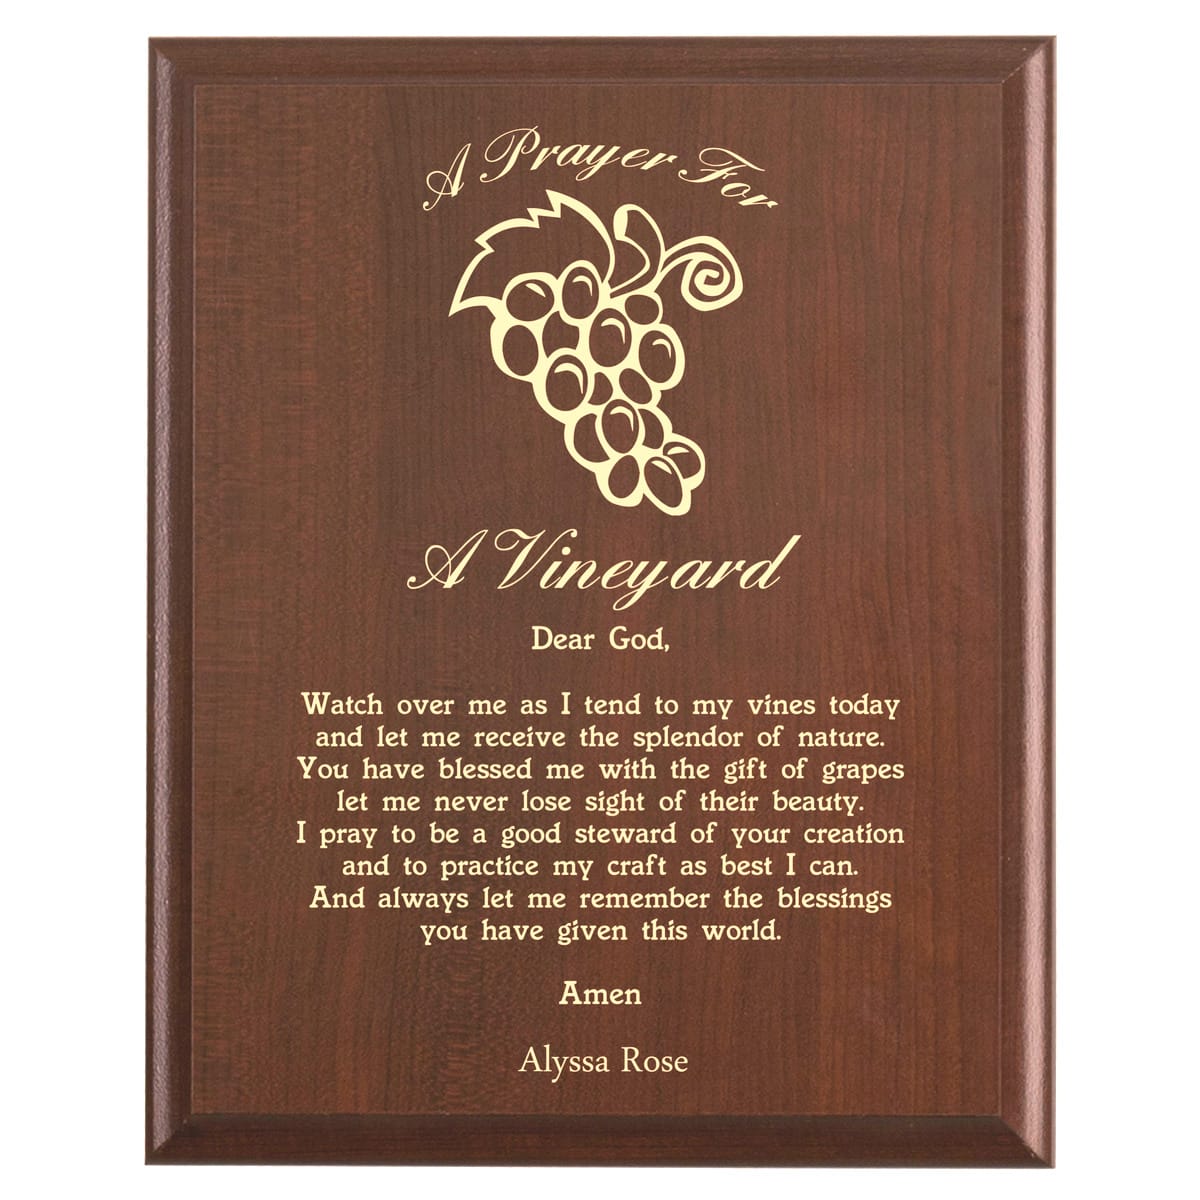 Plaque photo: Vineyard Prayer Plaque design with free personalization. Wood style finish with customized text.